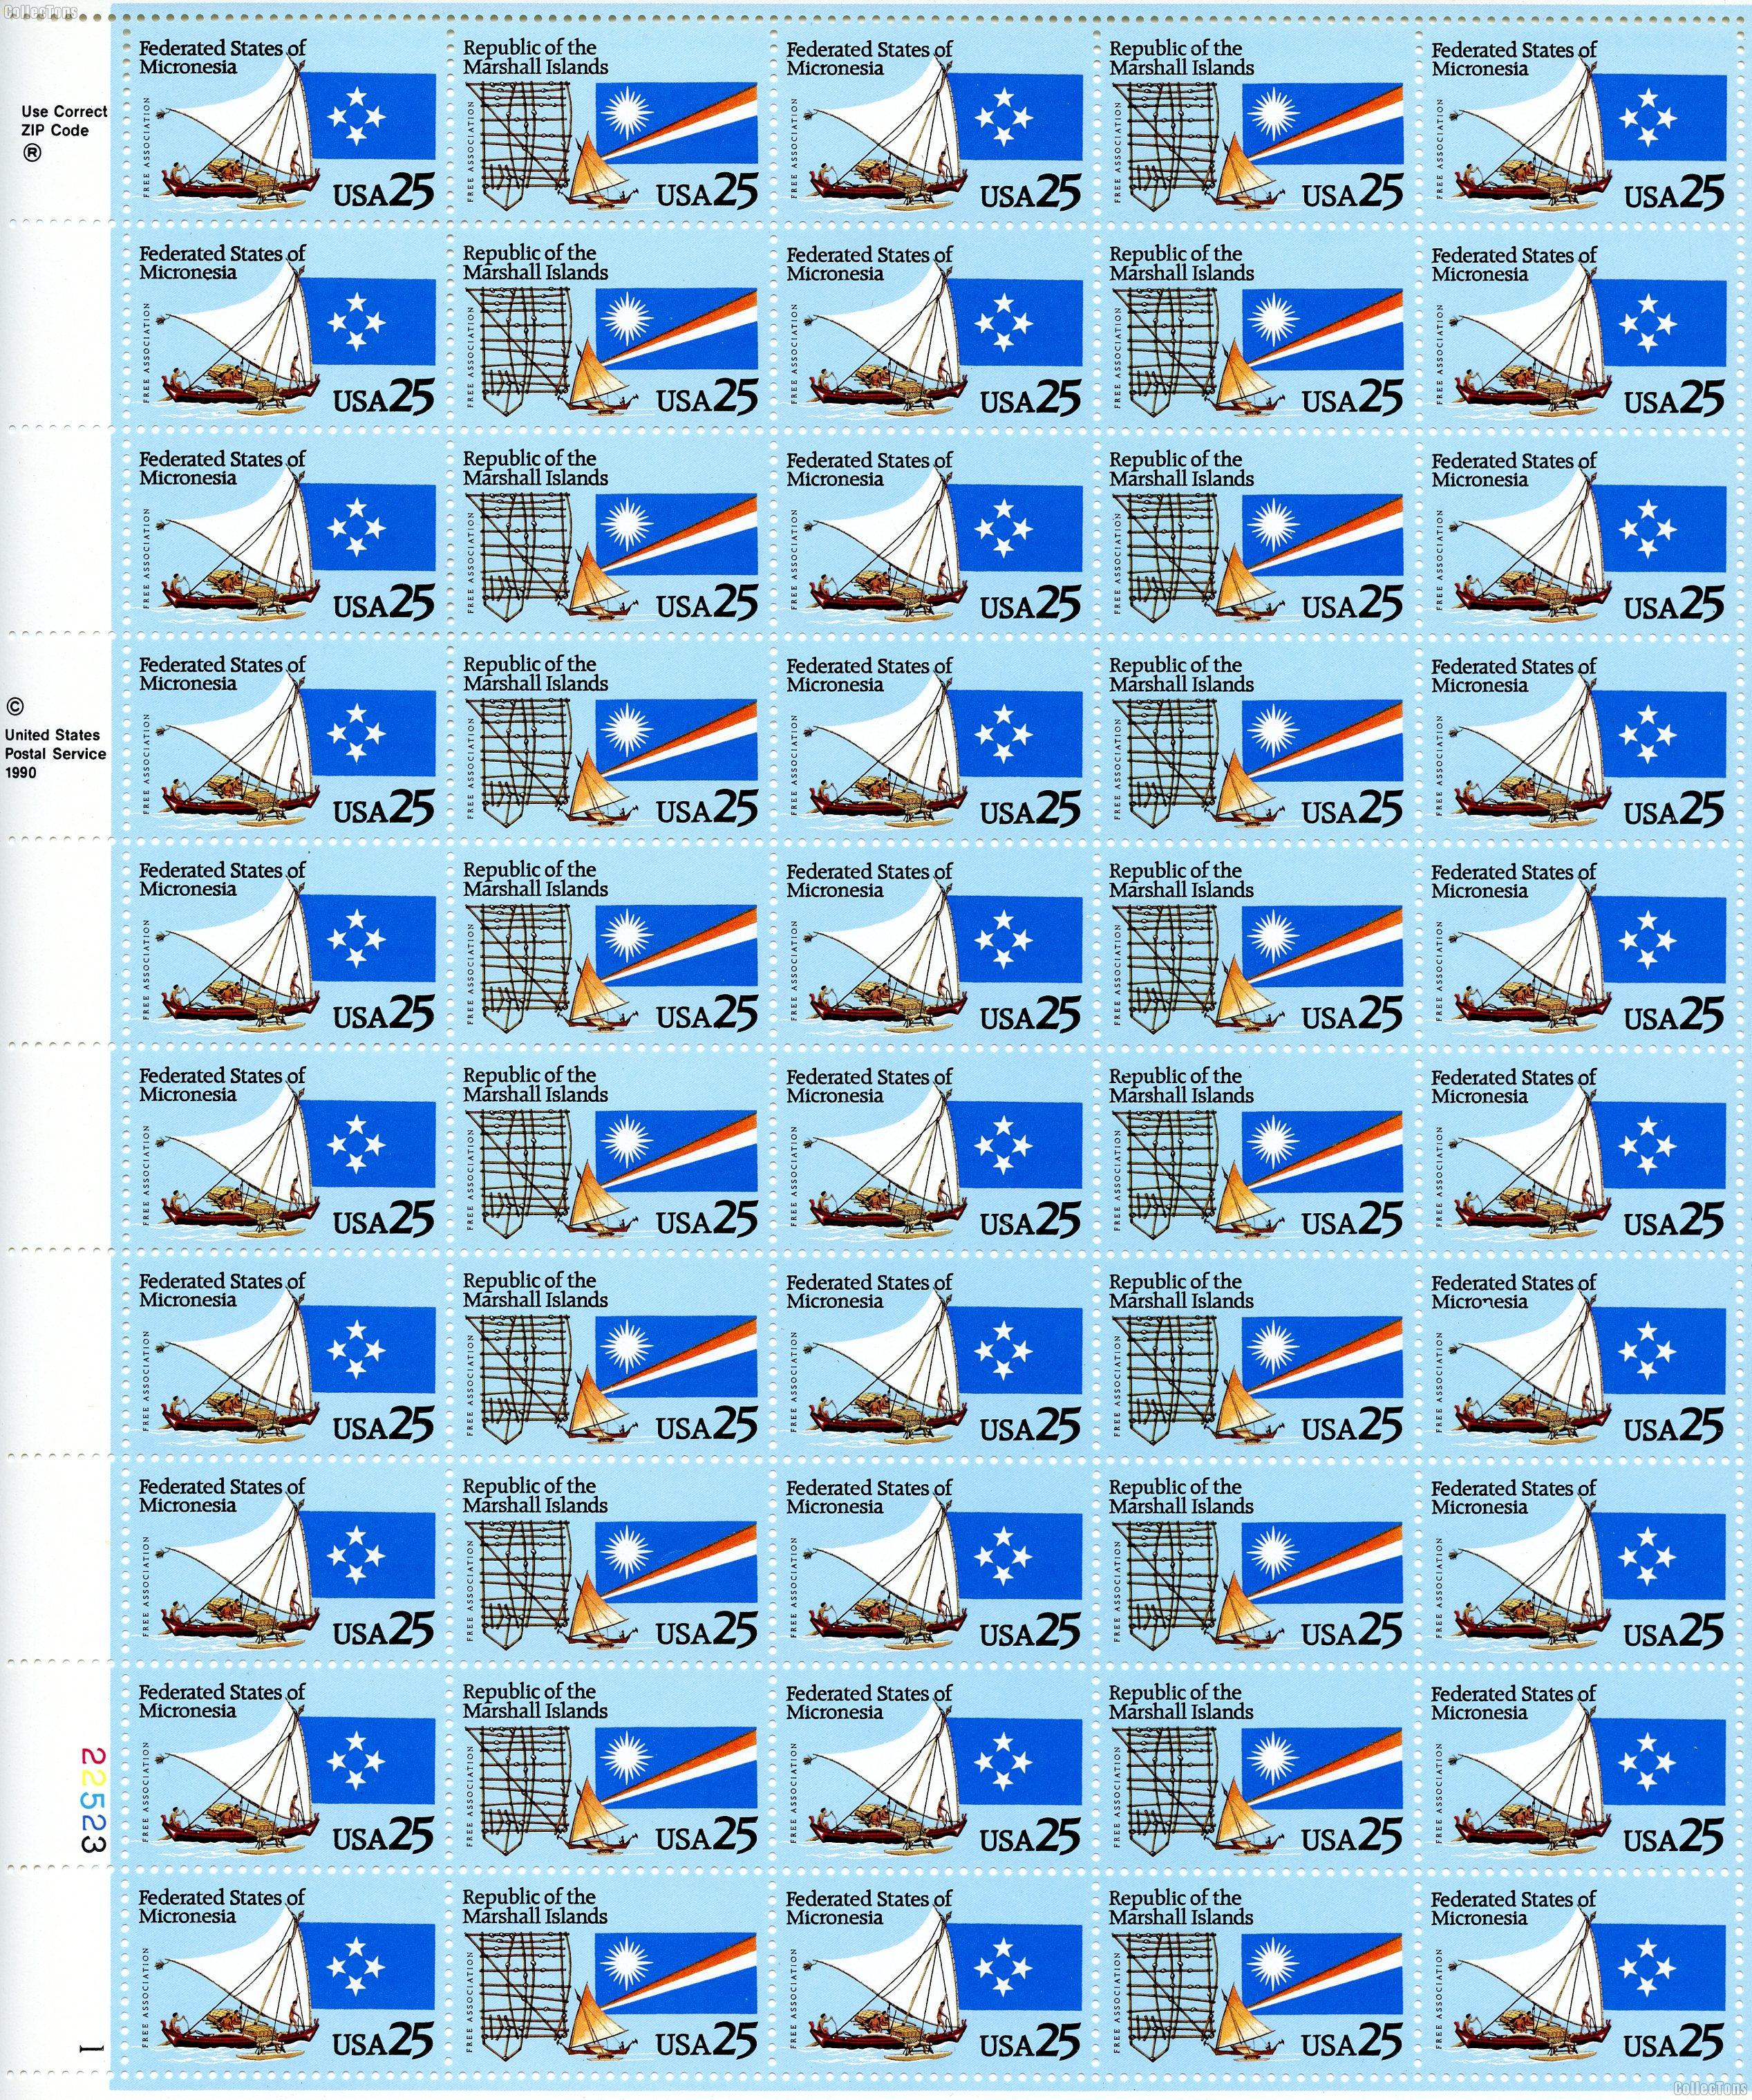 1990 Micronesia and Marshall Islands 25 Cent US Postage Stamp MNH Sheet of 50 Scott #2506-2507